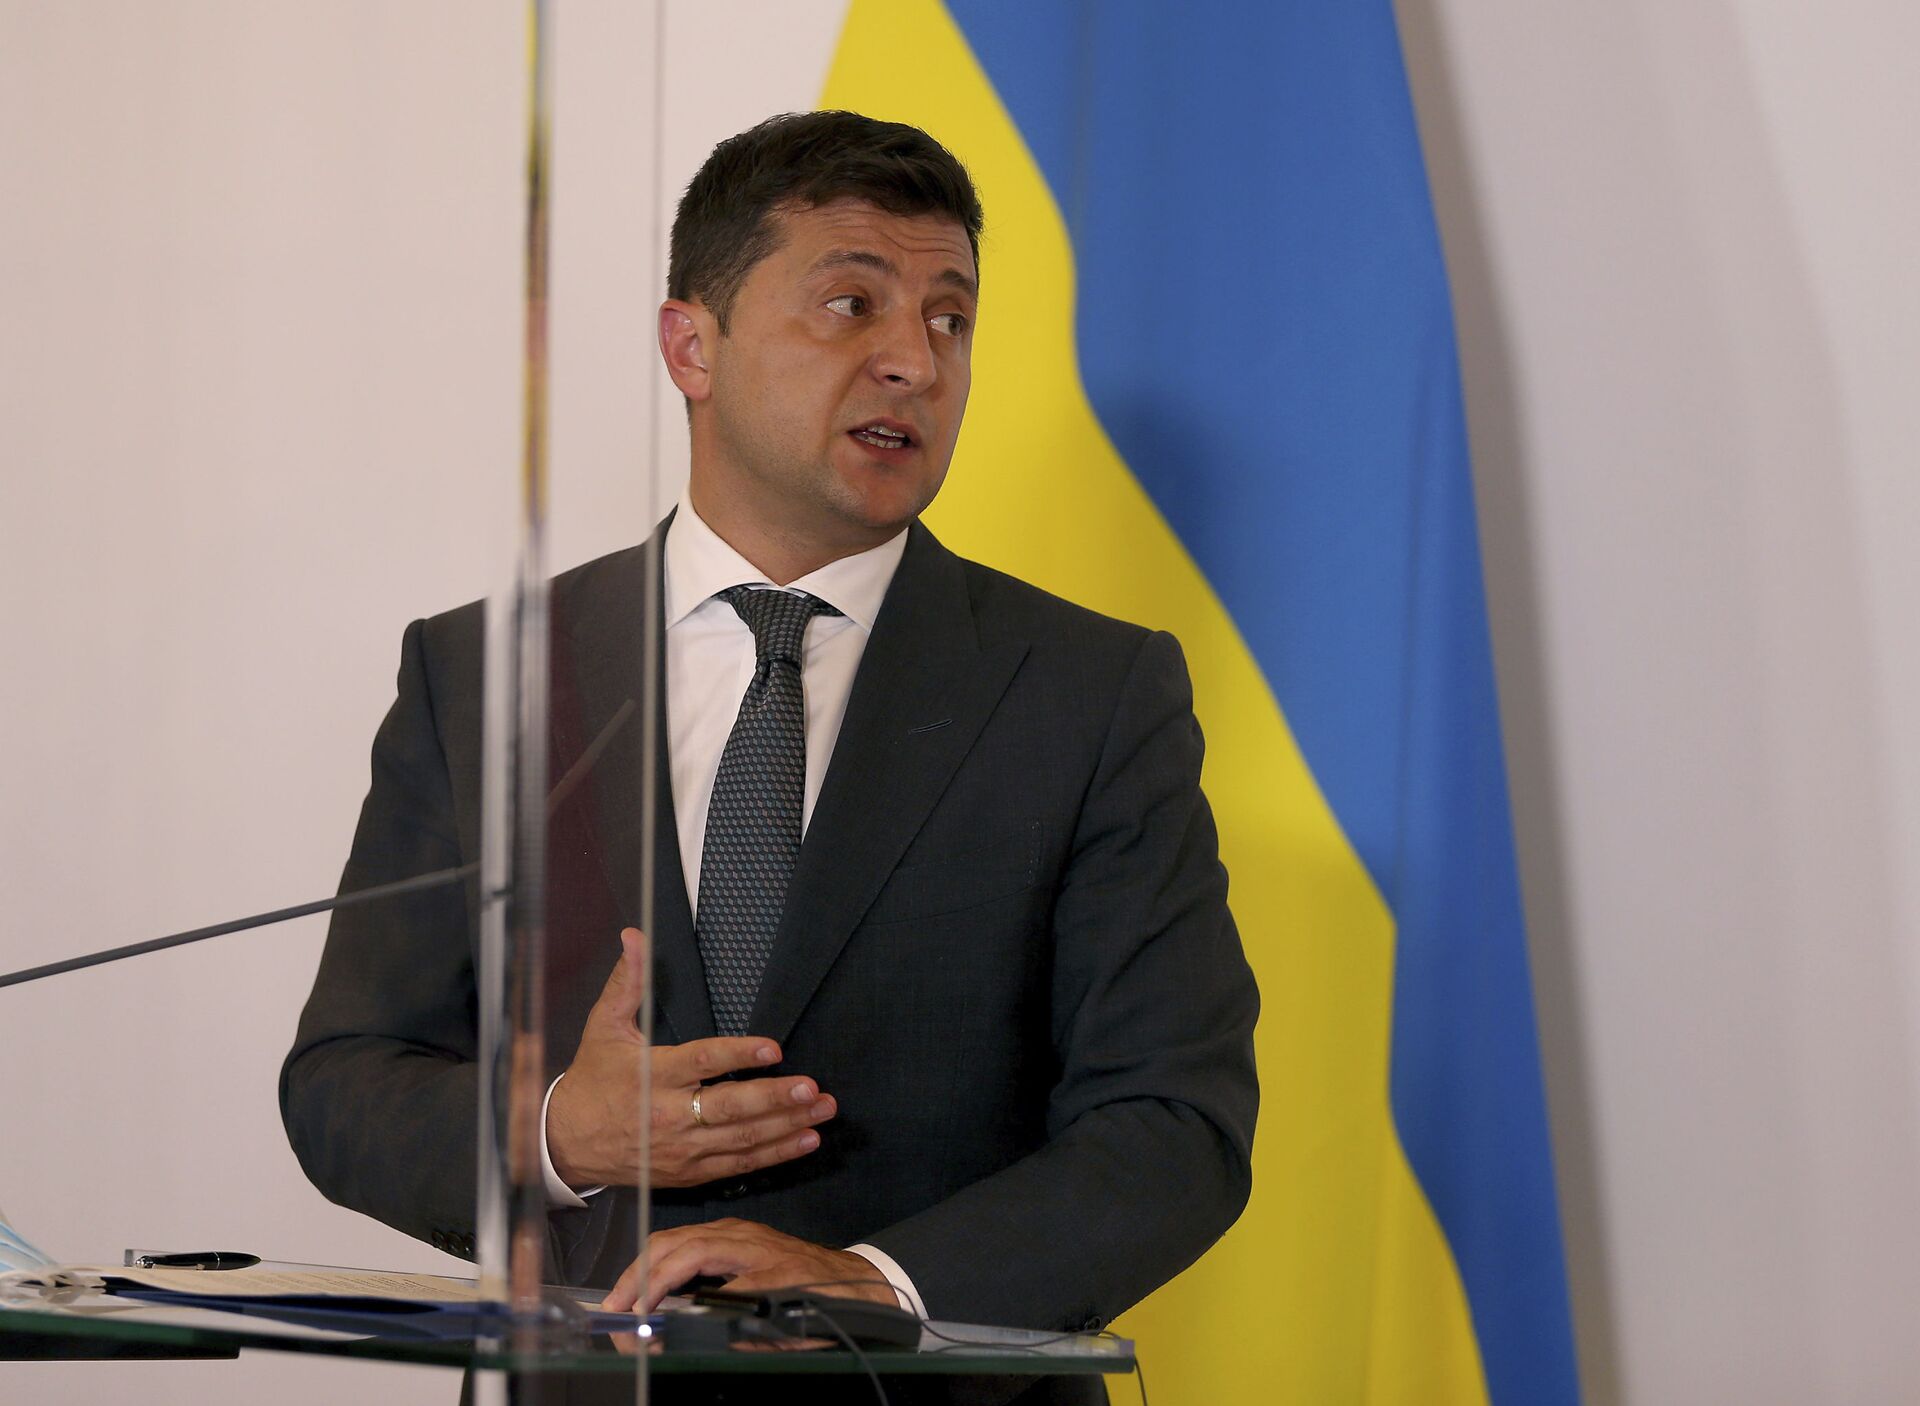 President of Ukraine Volodymyr Zelensky addresses the media at a joint press conference with Austrian Chancellor Sebastian Kurz after their meeting at the federal chancellery in Vienna, Austria, Tuesday, Sept. 15, 2020. - Sputnik International, 1920, 07.09.2021